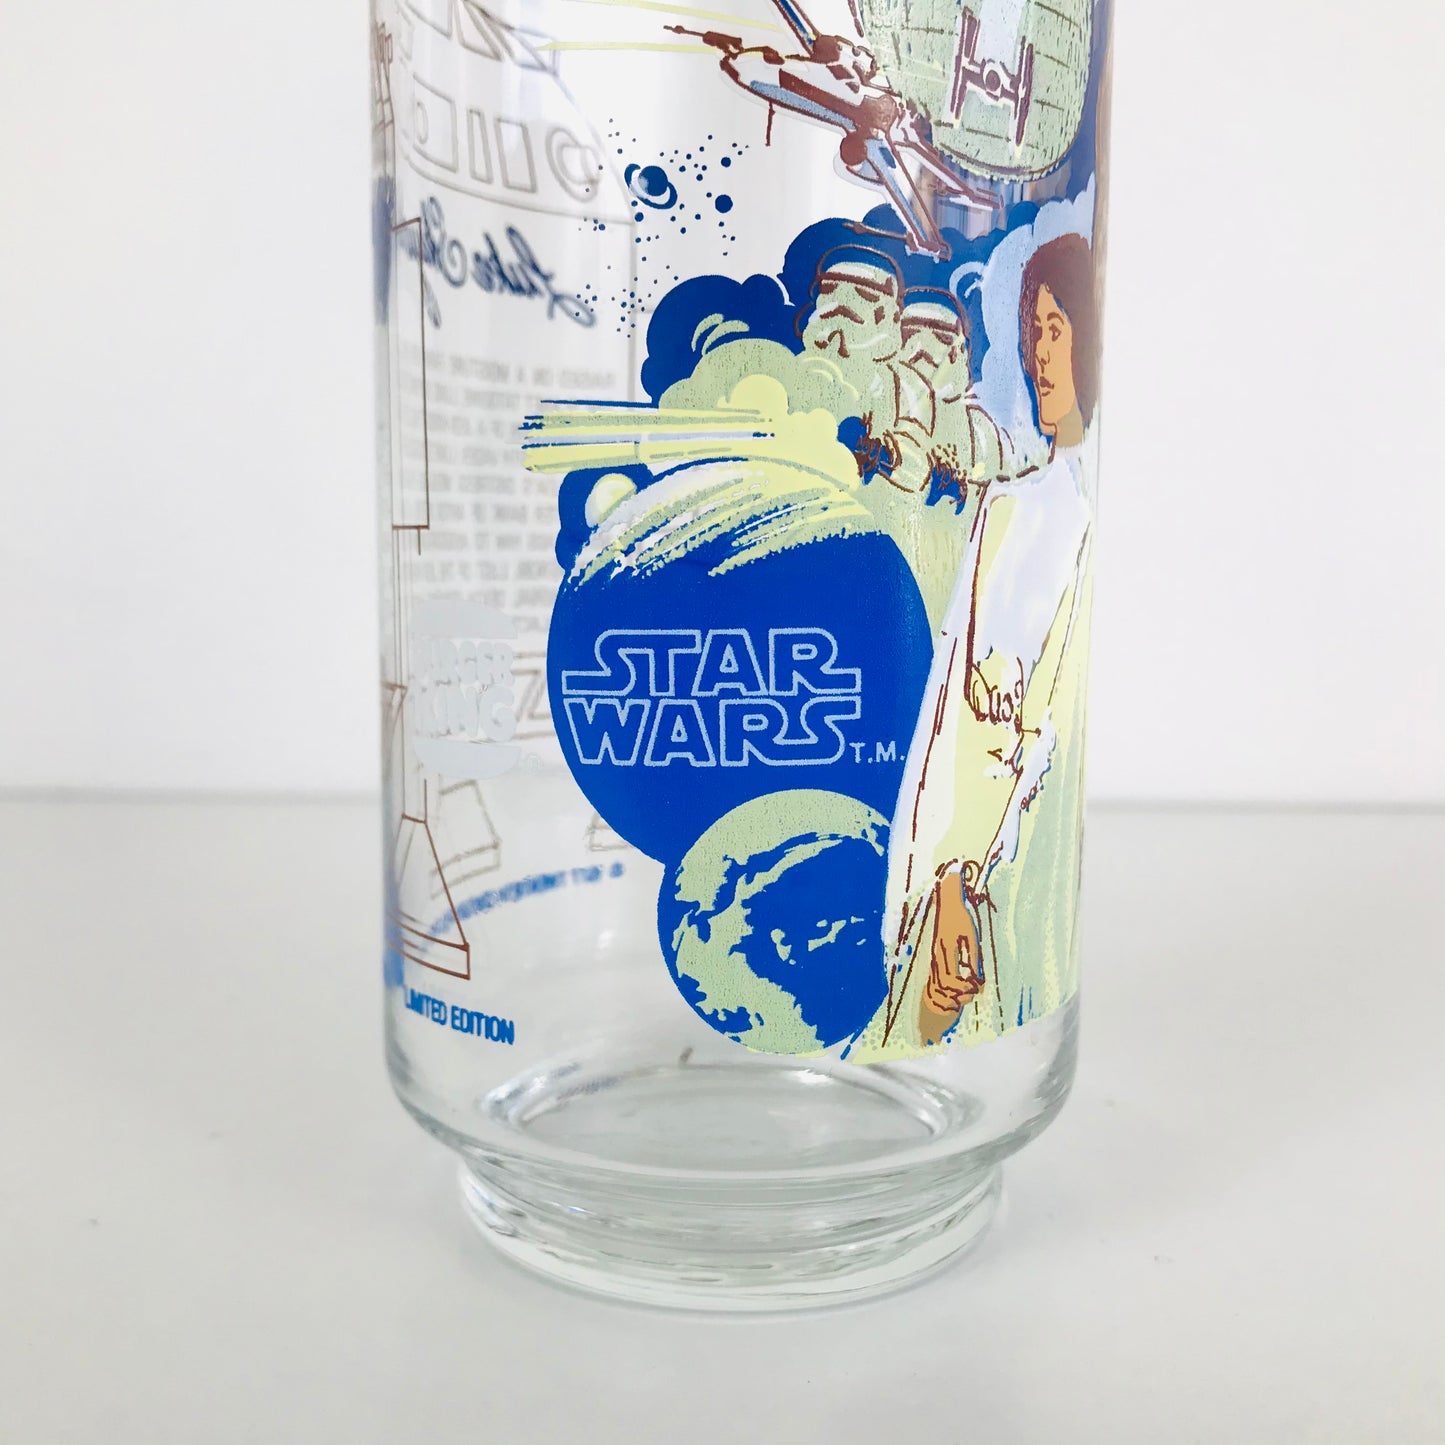 An original 1977 Star Wars collectible glass tumbler with artwork depicting several characters and planets from the film.